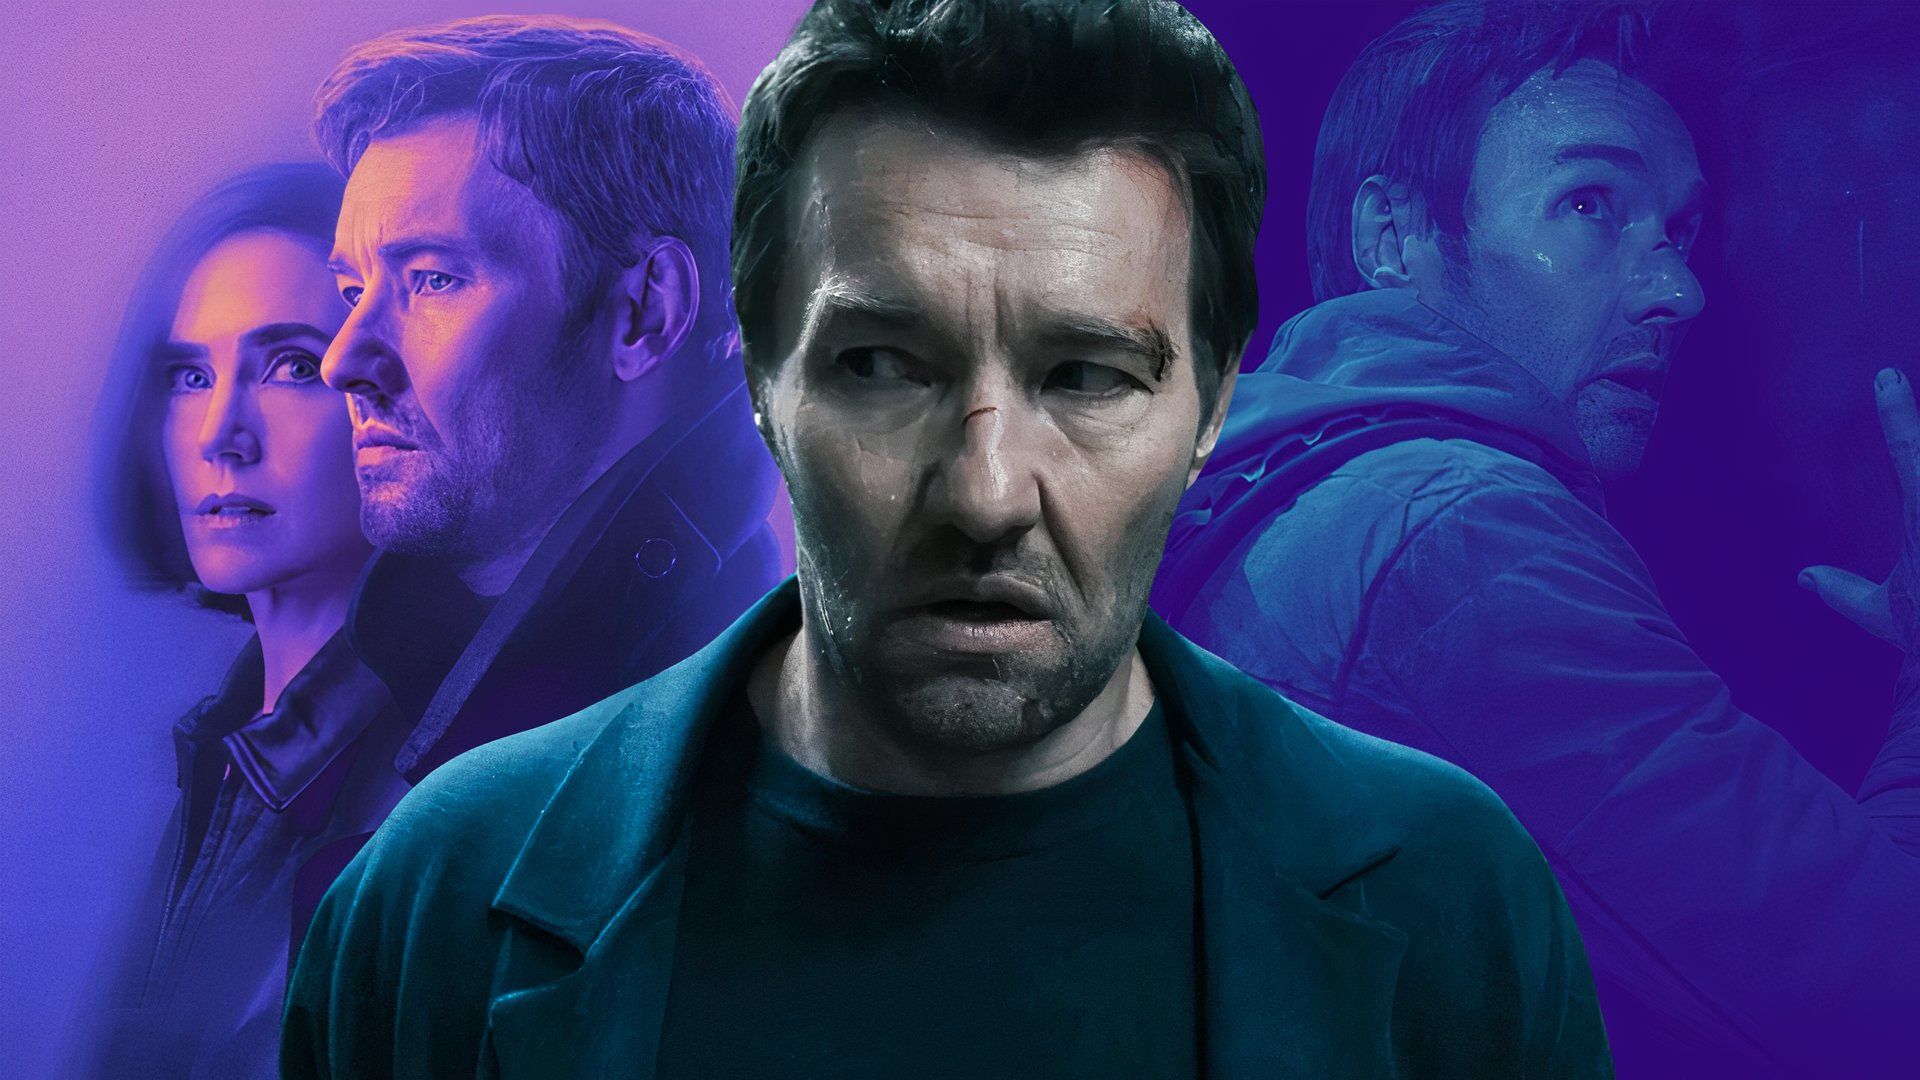 Joel Edgerton with cuts on his face next to Jennifer Connelly in an edited image from Dark Matter